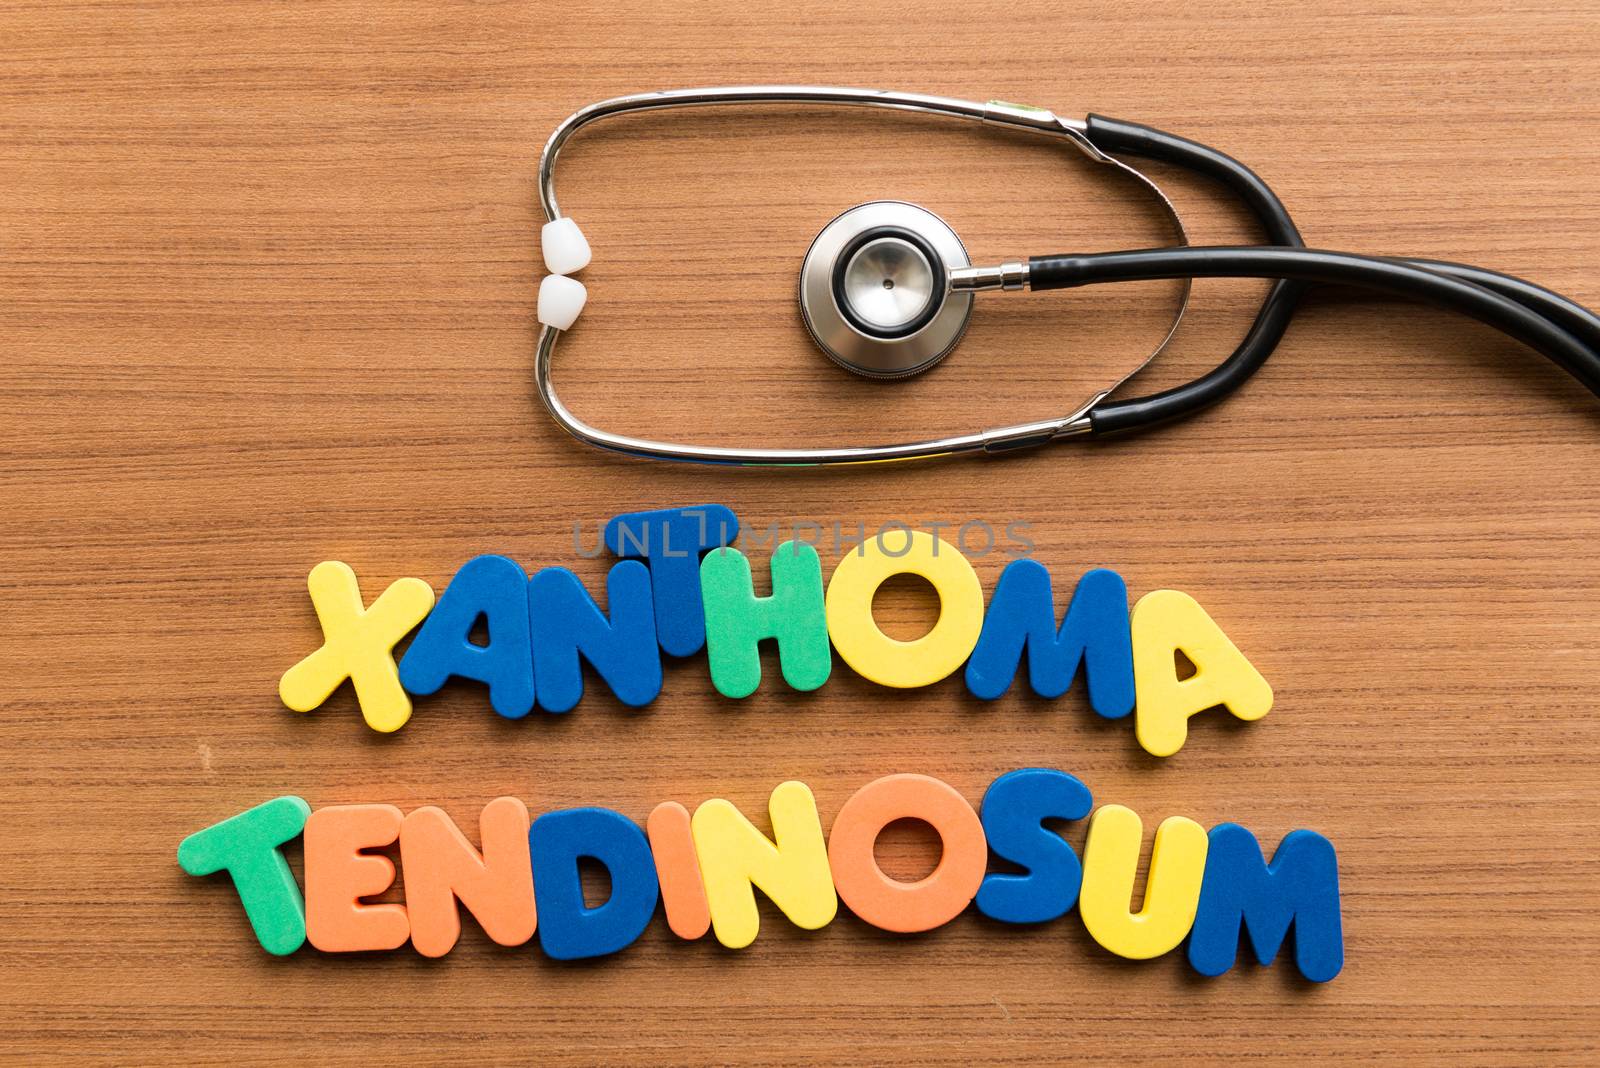 xanthoma tendinosum colorful word with stethoscope by sohel.parvez@hotmail.com